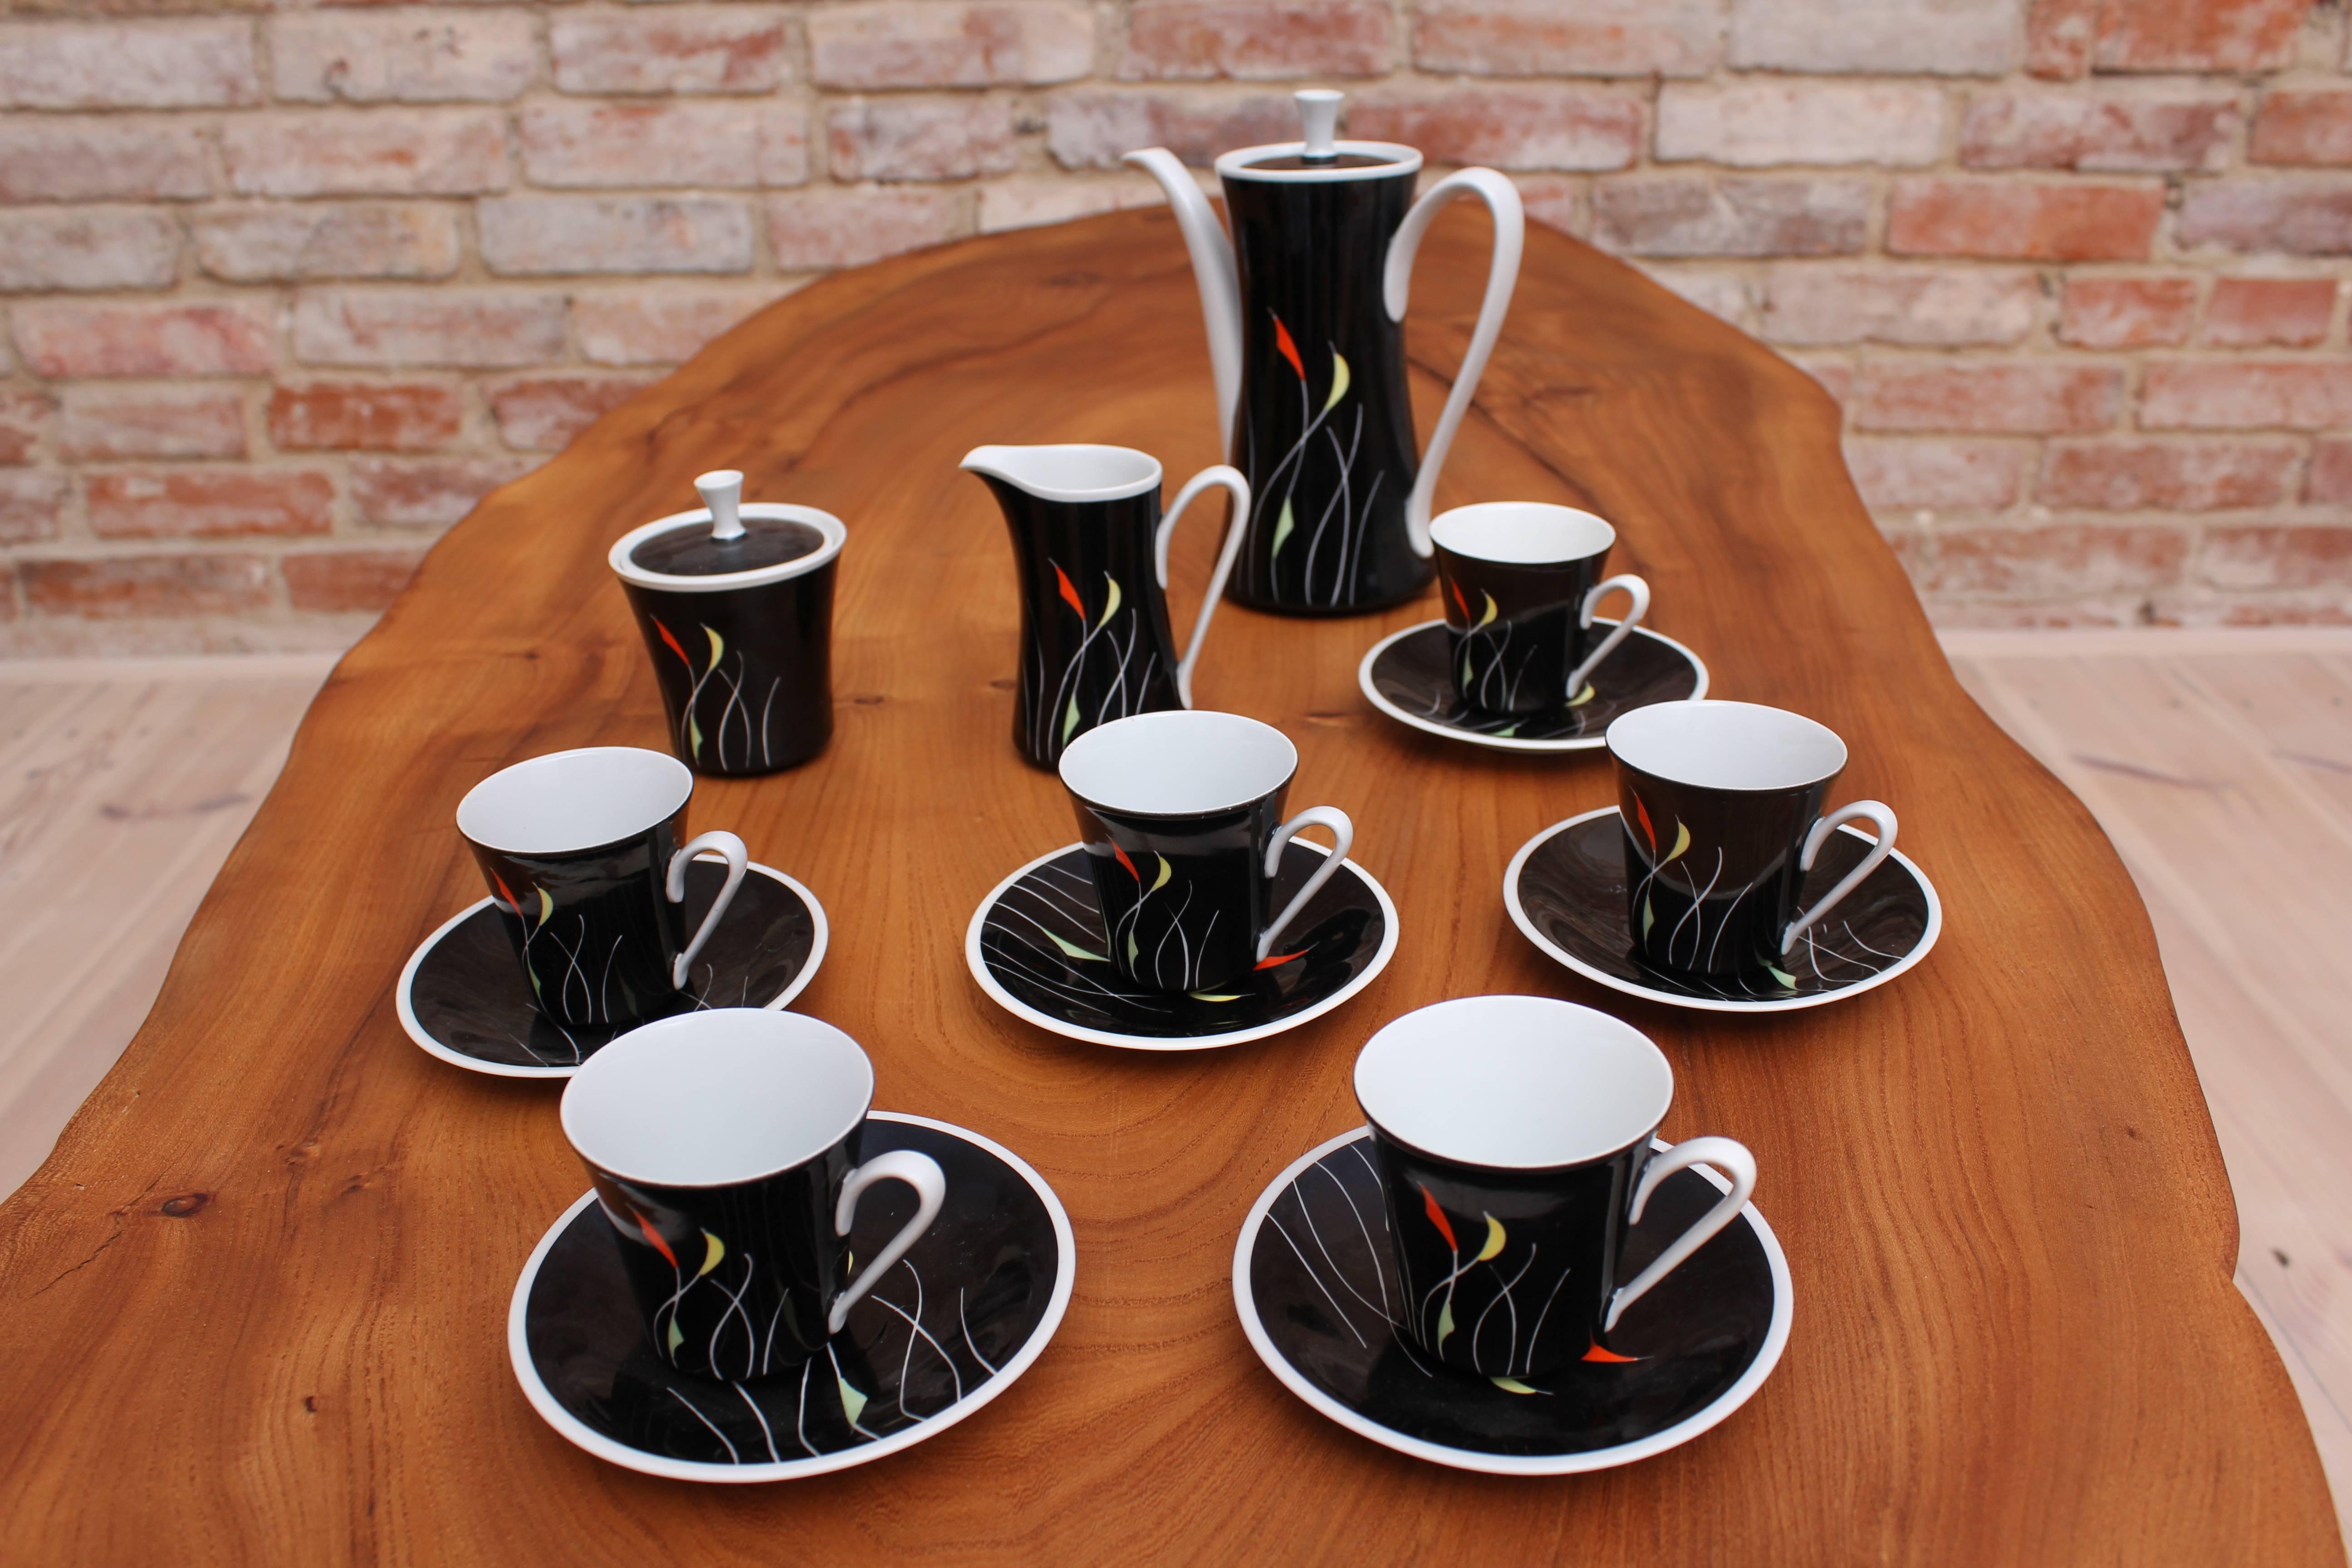 Porcelain Coffee Set from Kahla in Black and White, 1960s, Hand-painted Pattern In Good Condition For Sale In Wrocław, Poland